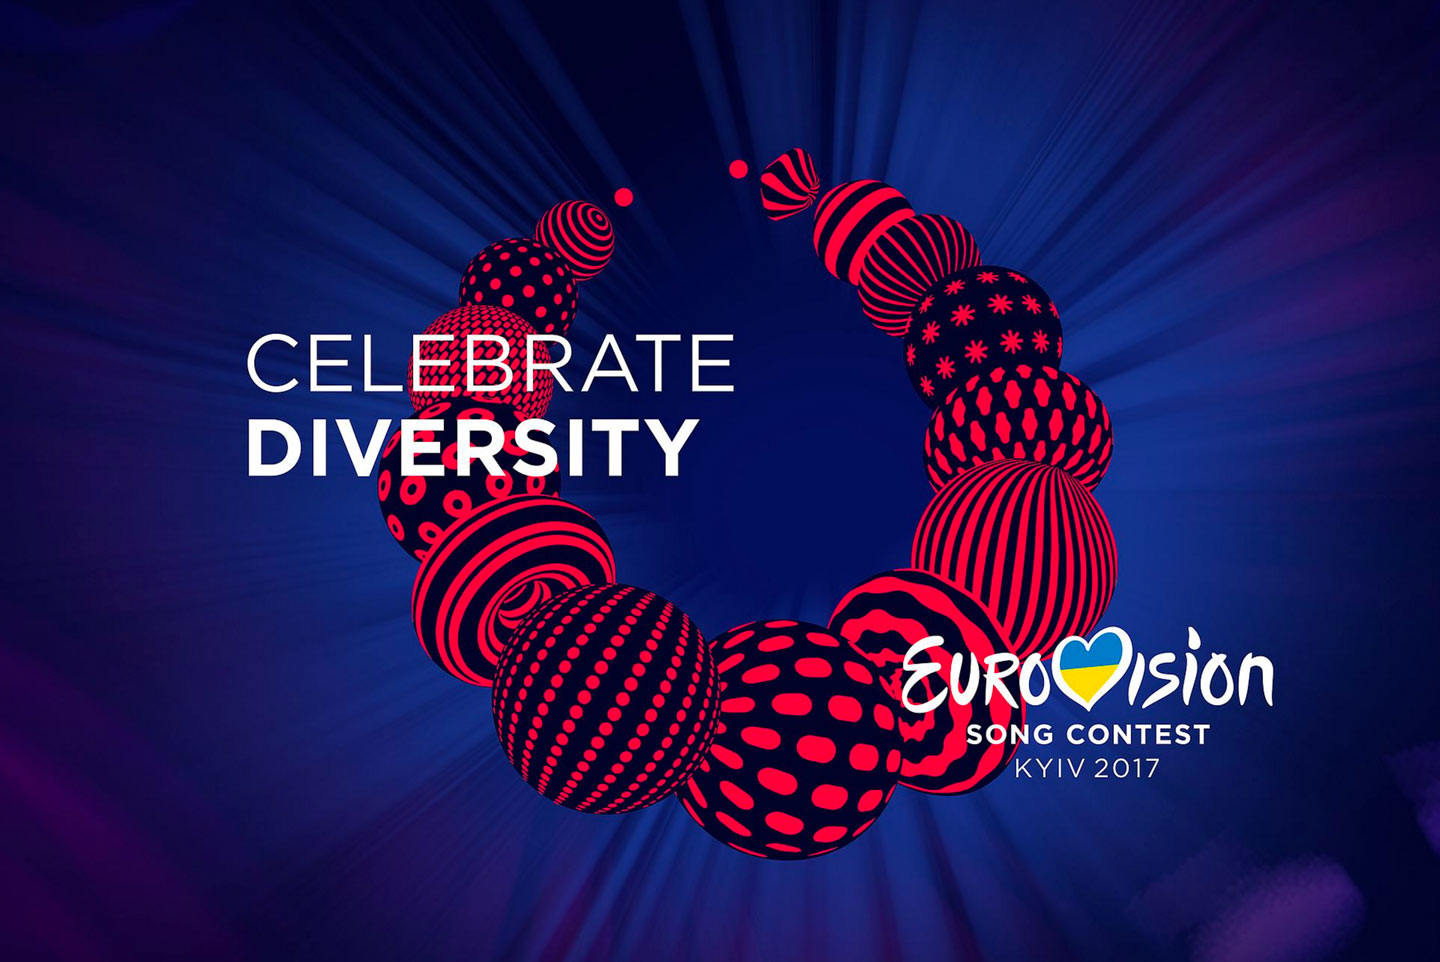 <p>Фото: &copy; <a href="https://en.wikipedia.org/wiki/Eurovision_Song_Contest_2017#/media/File:Eurovision_Song_Contest_2017_logo.png" target="_blank">wikipedia.org</a></p>